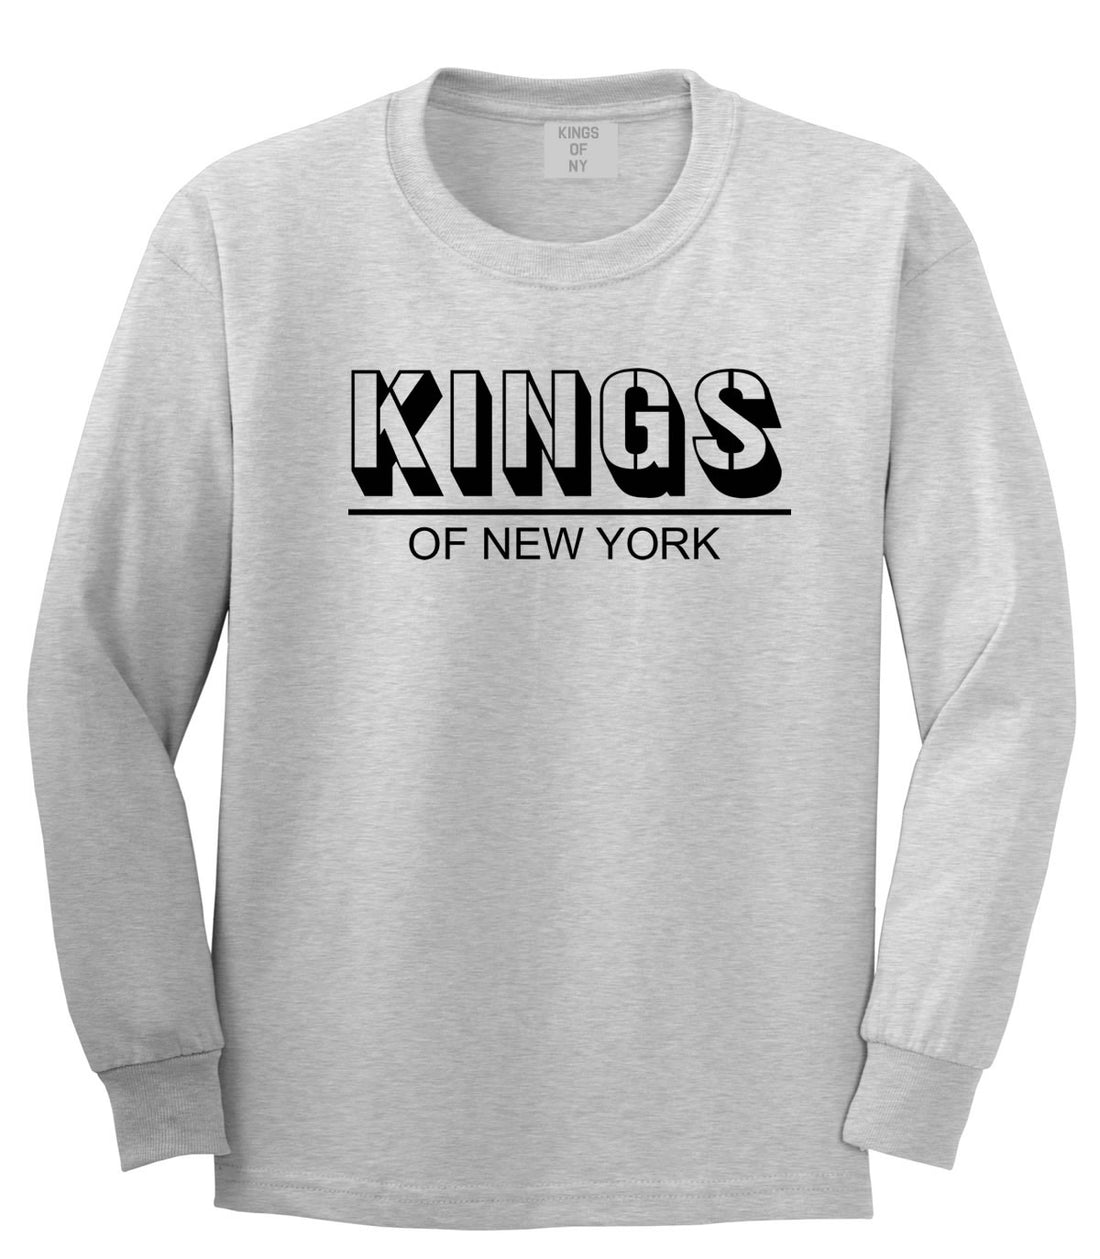 King Branded Block Letters Long Sleeve T-Shirt in Grey by Kings Of NY